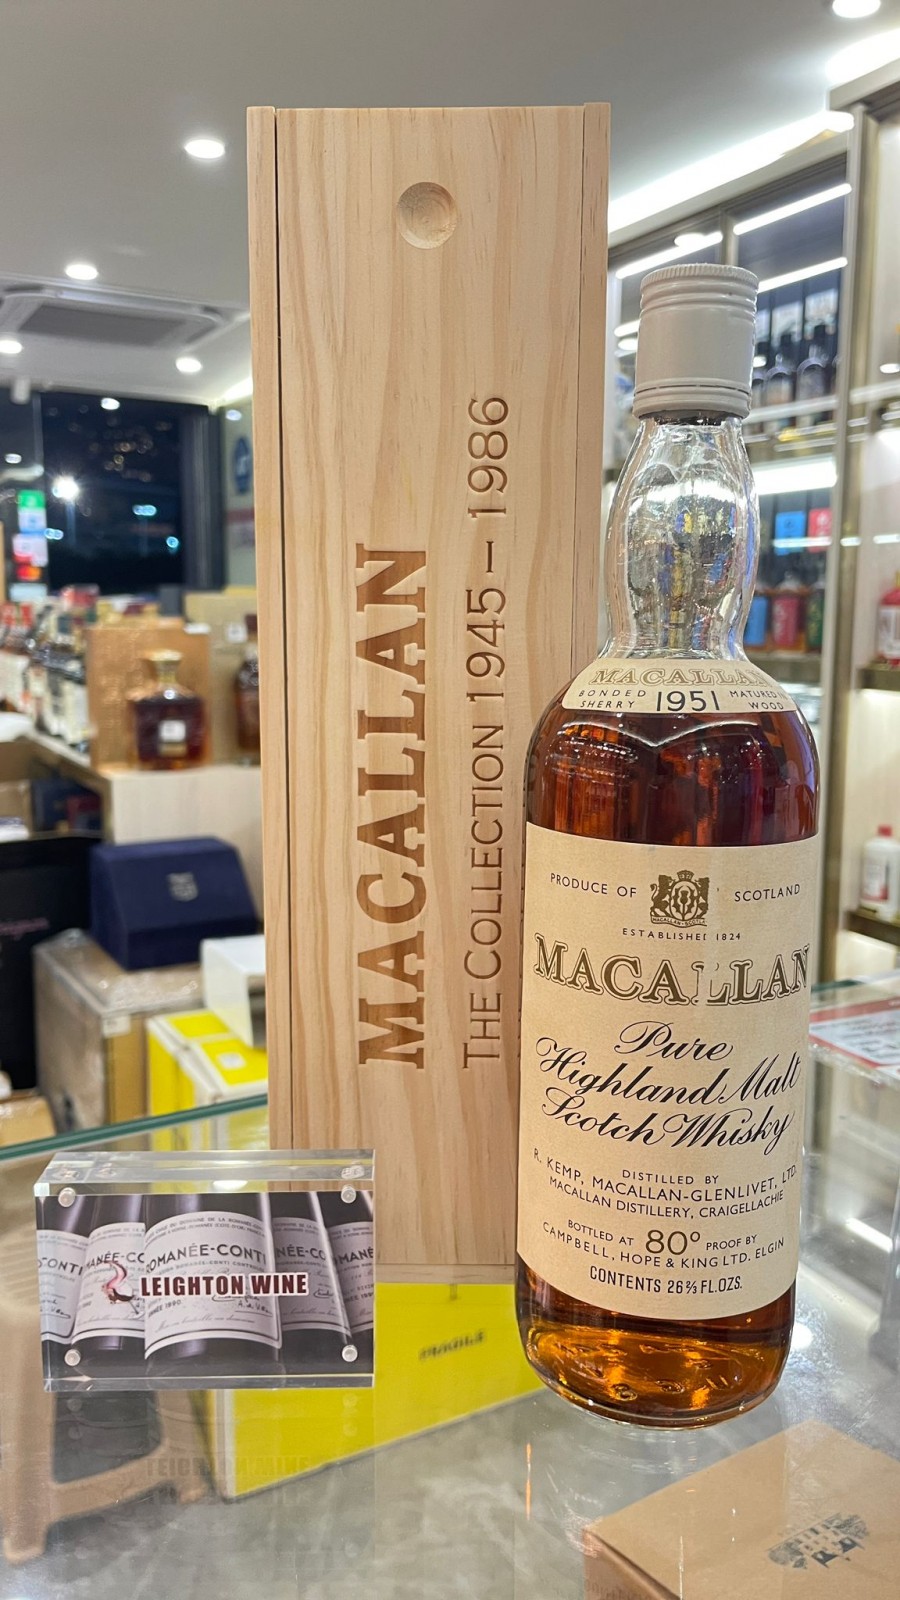 MACALLAN 1951 - 80° PROOF - 15 YEARS OLD 80 PROOF